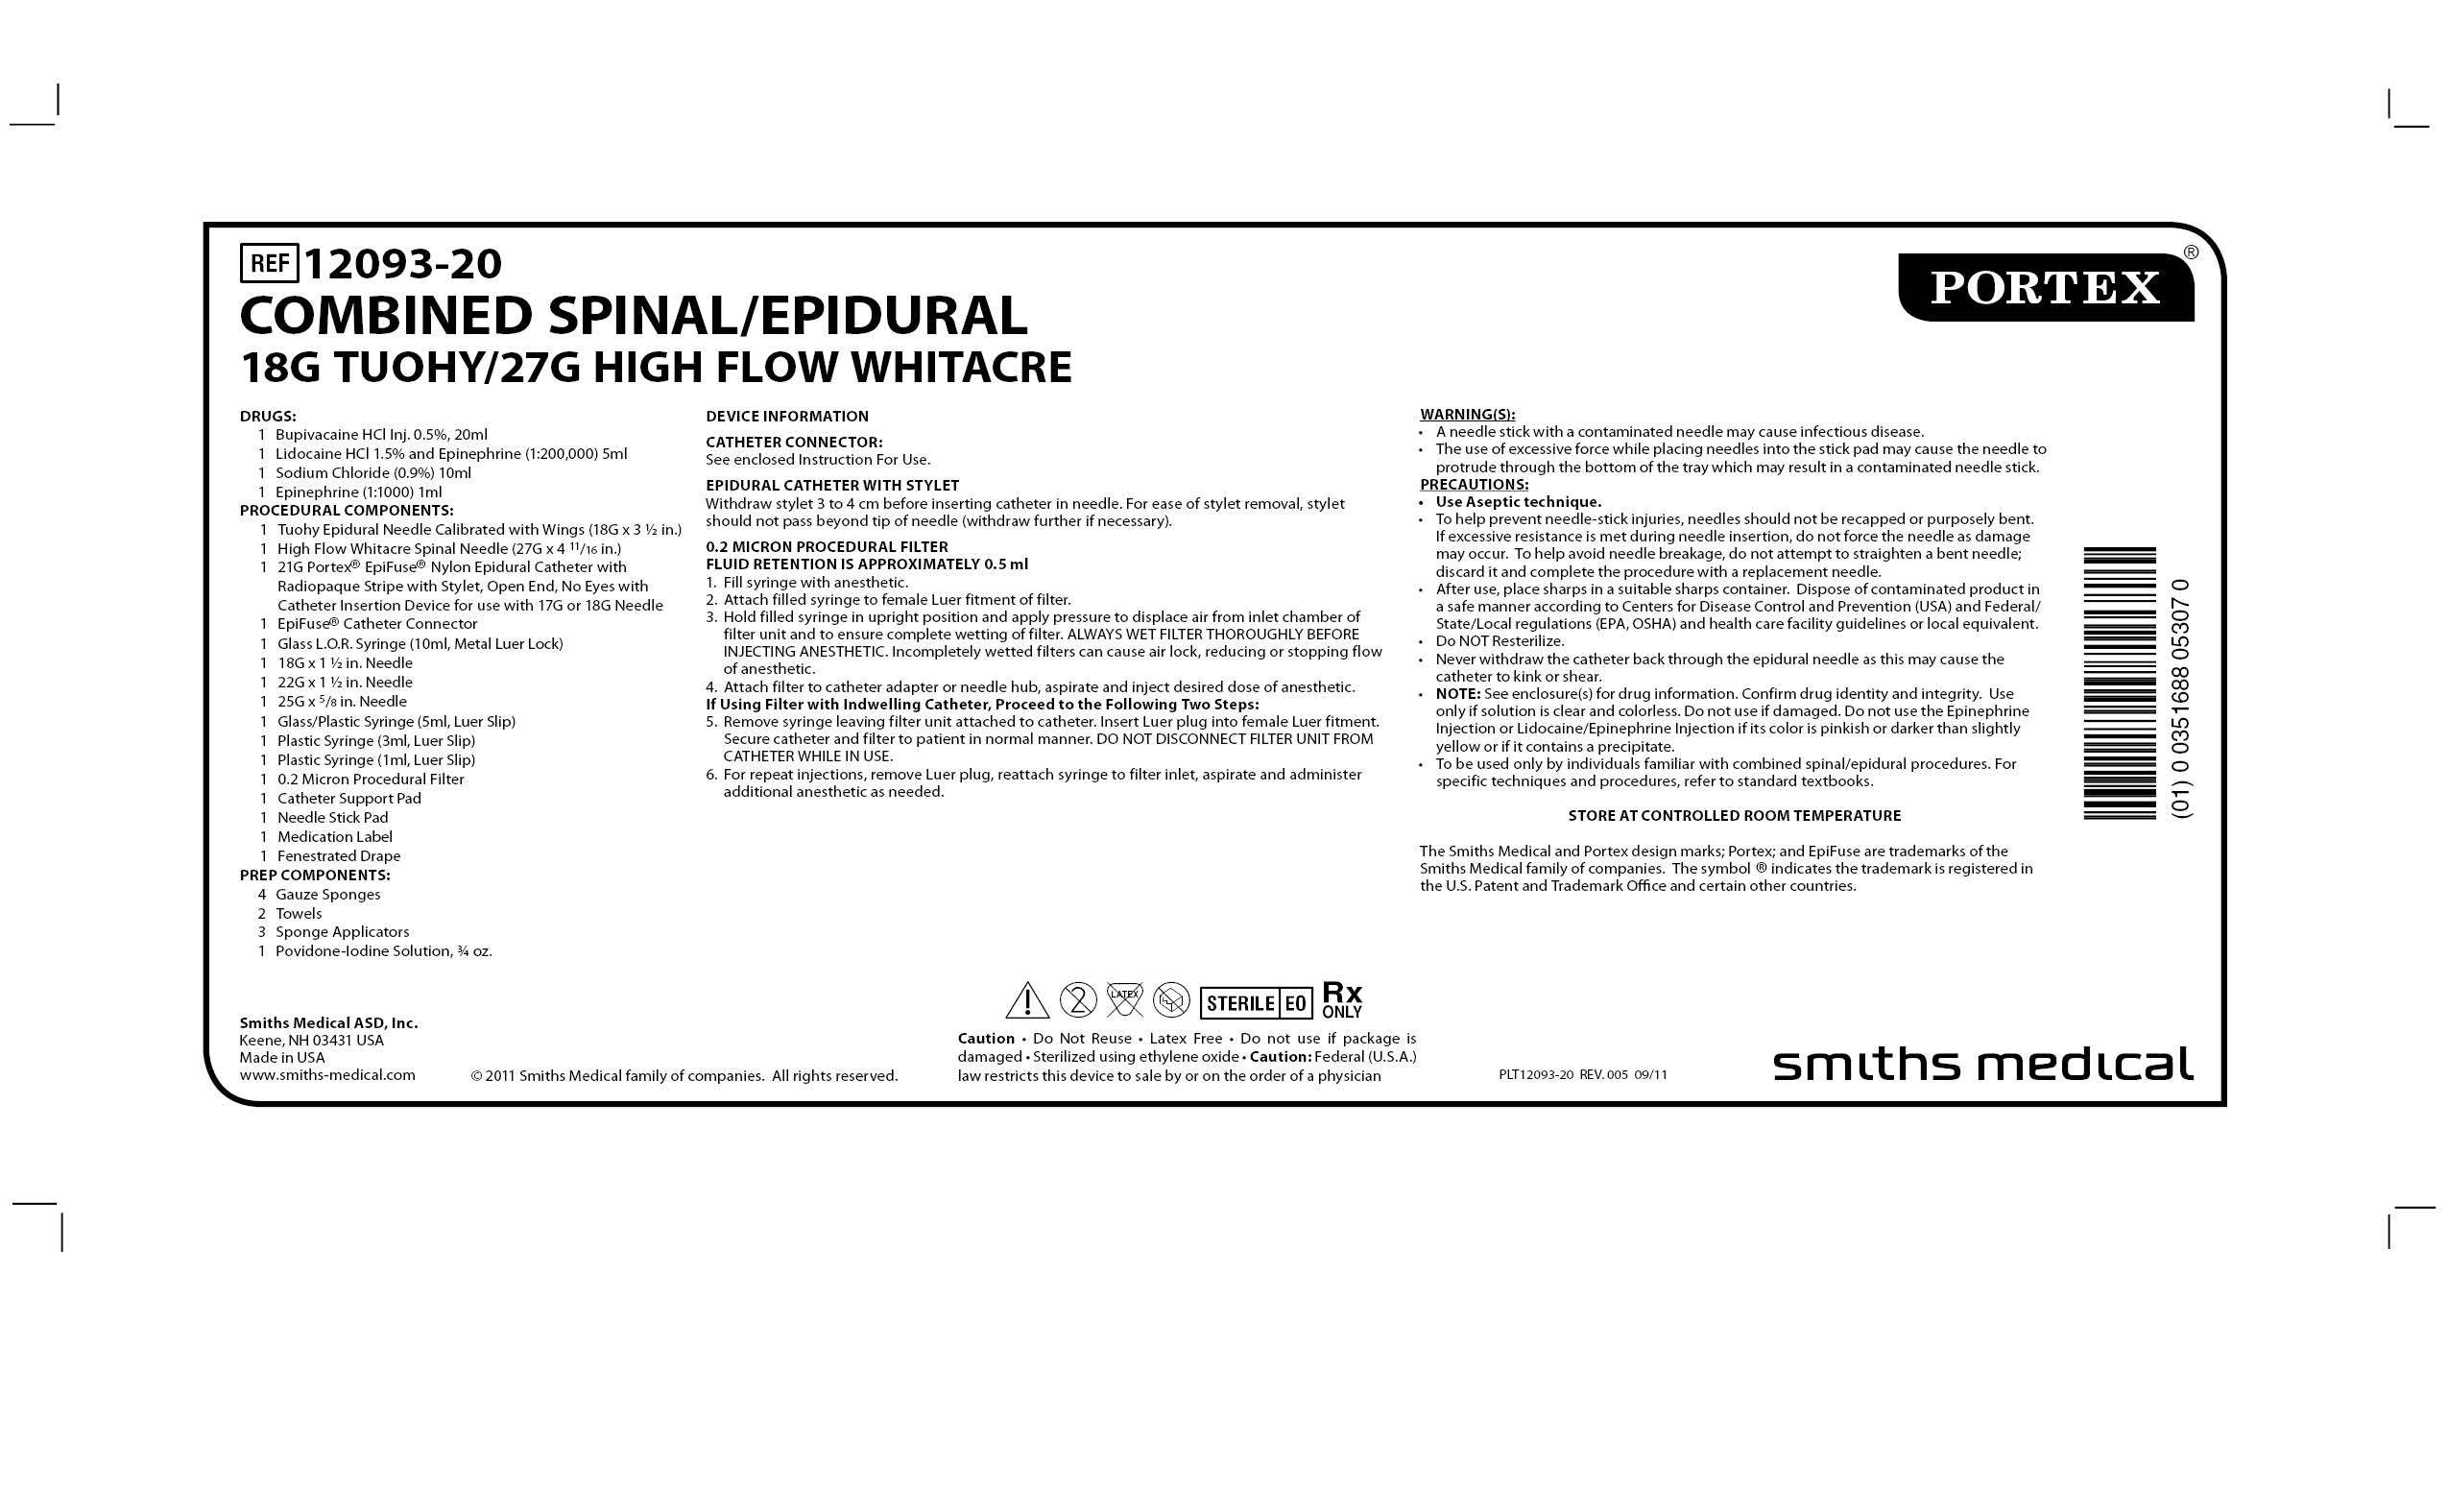 12093-20 COMBINED SPINAL/EPIDURAL 18G TUOHY/27G HIGH FLOW WHITACRE